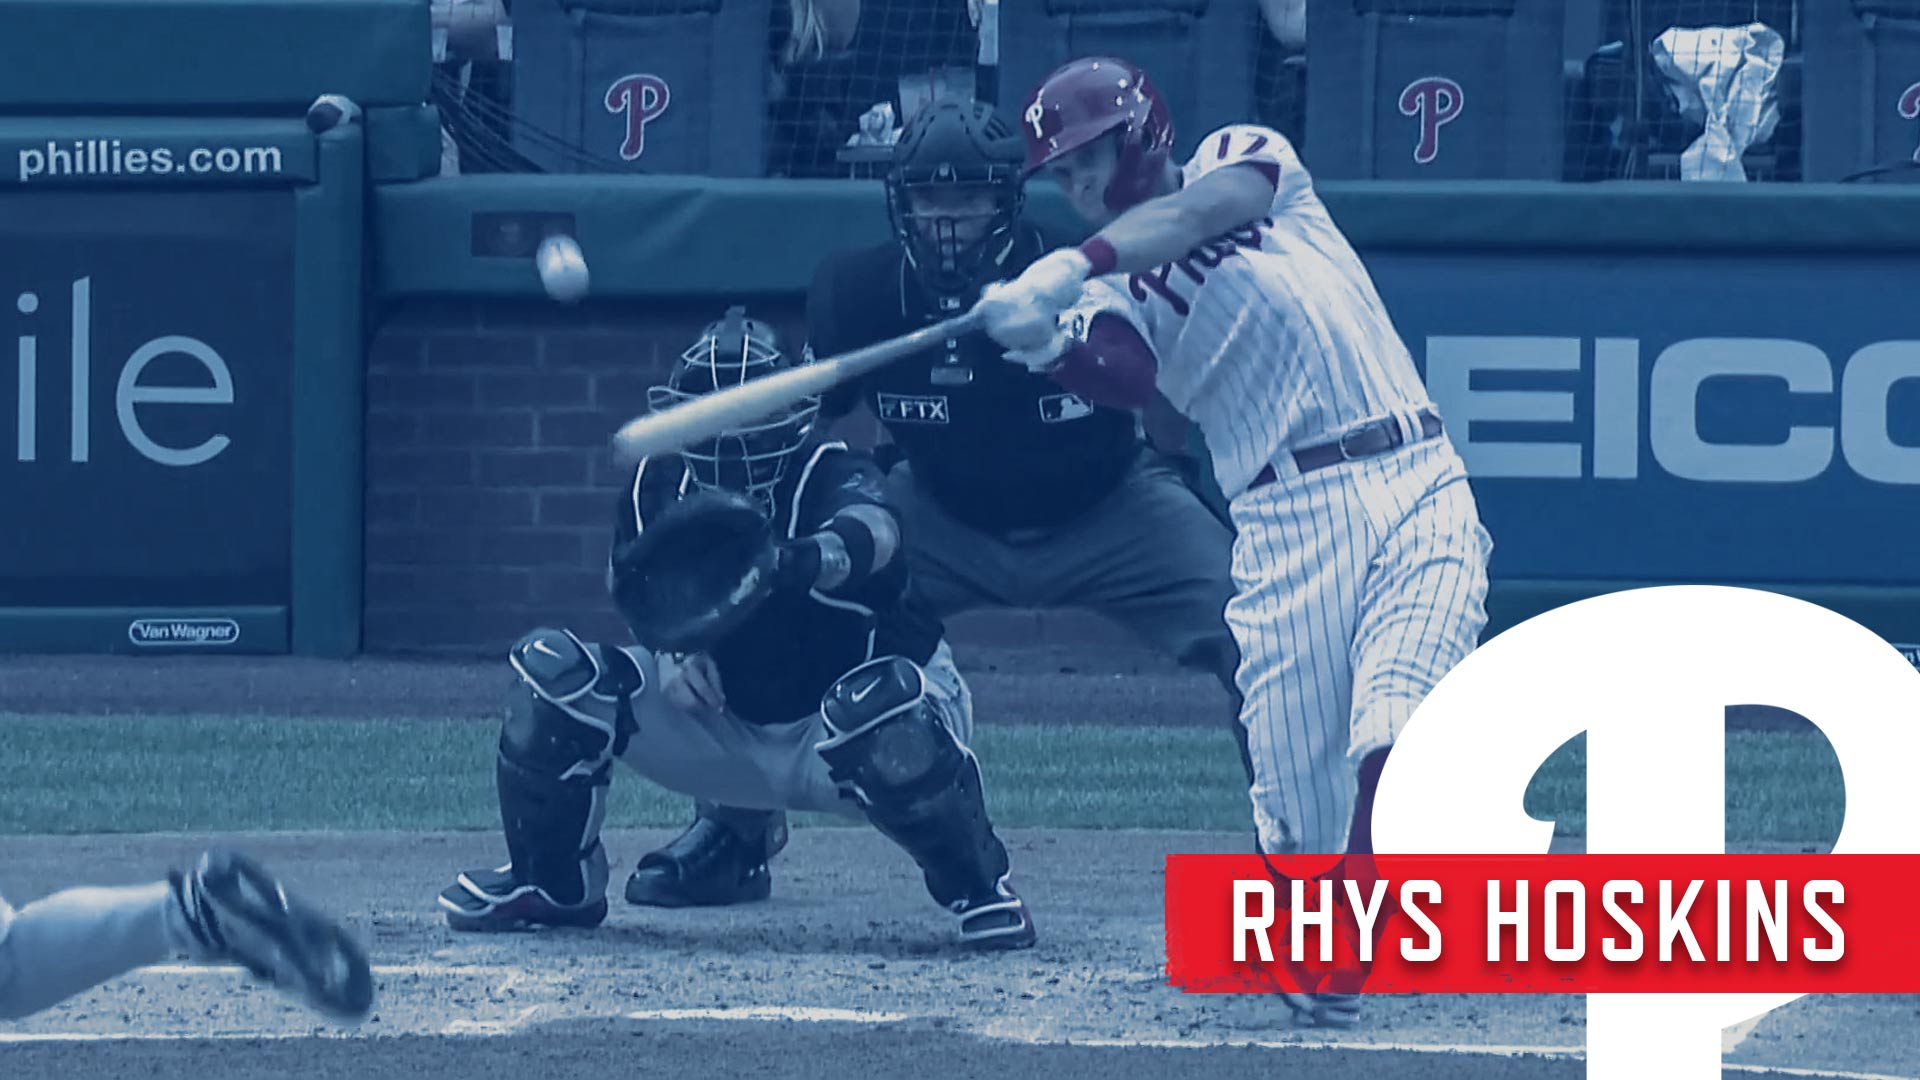 Hoskins delivers for Phillies